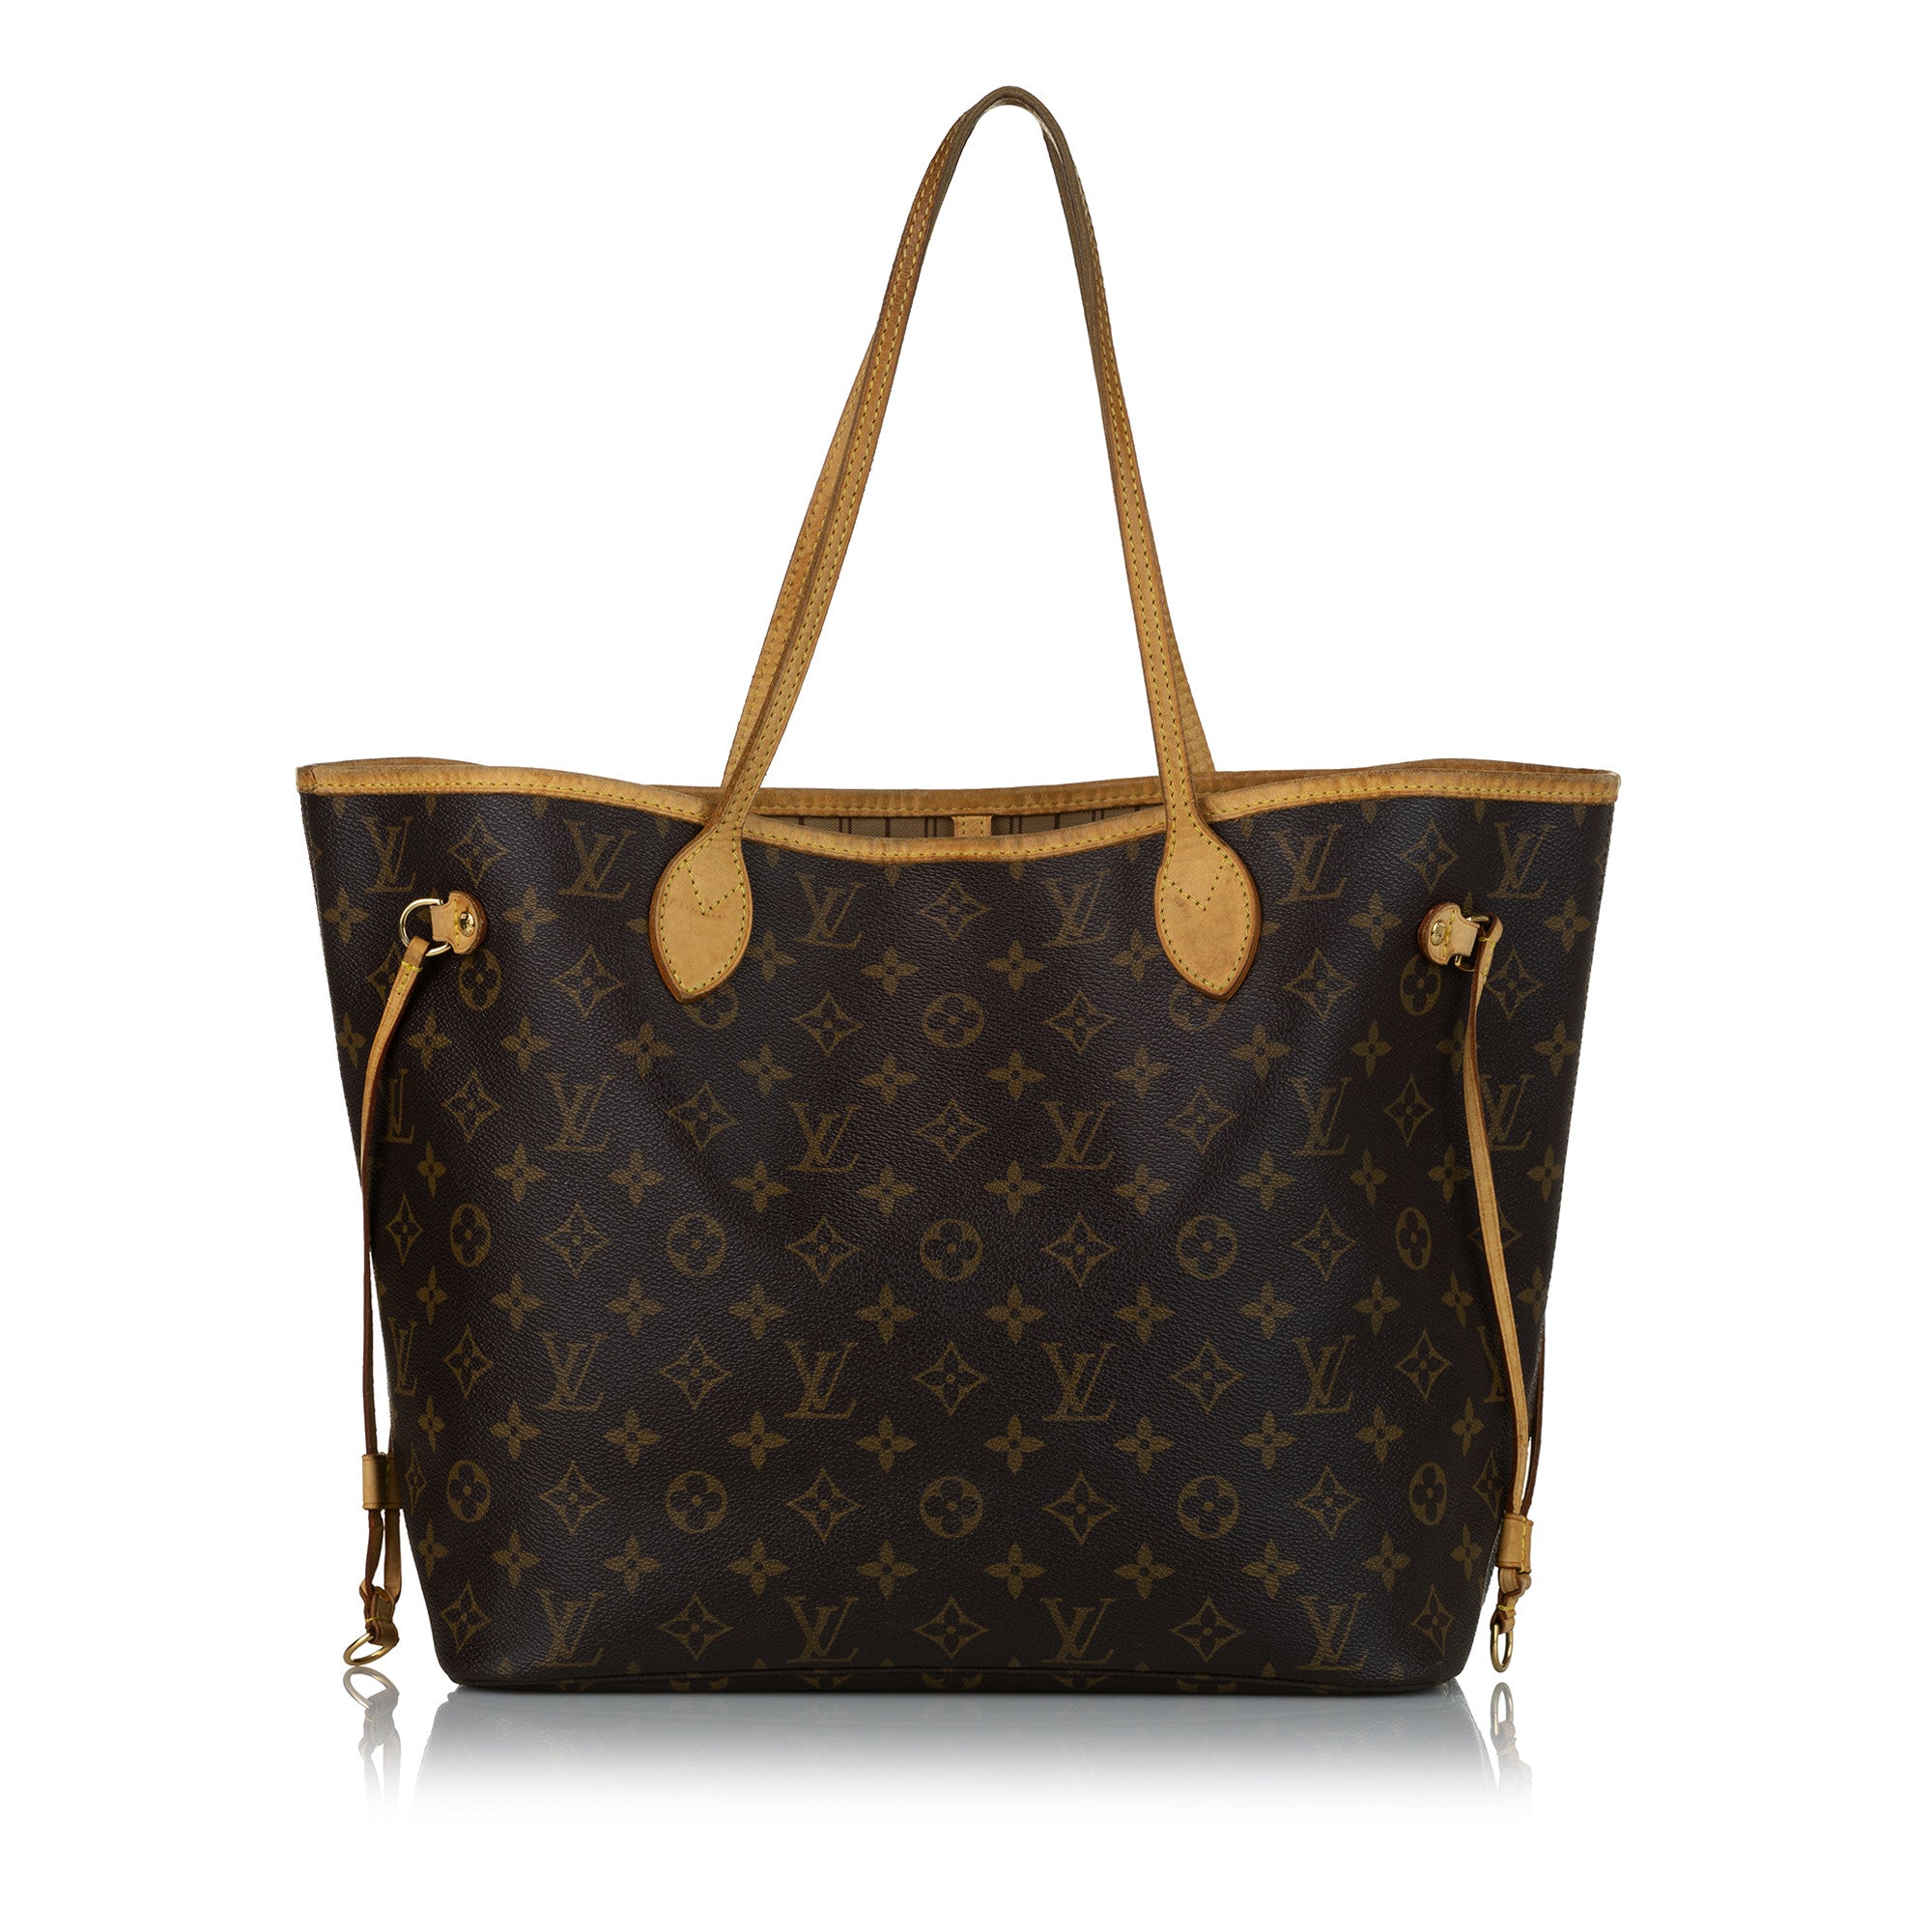 Louis Vuitton - Neverfull, Authentic Used Bags & Handbags